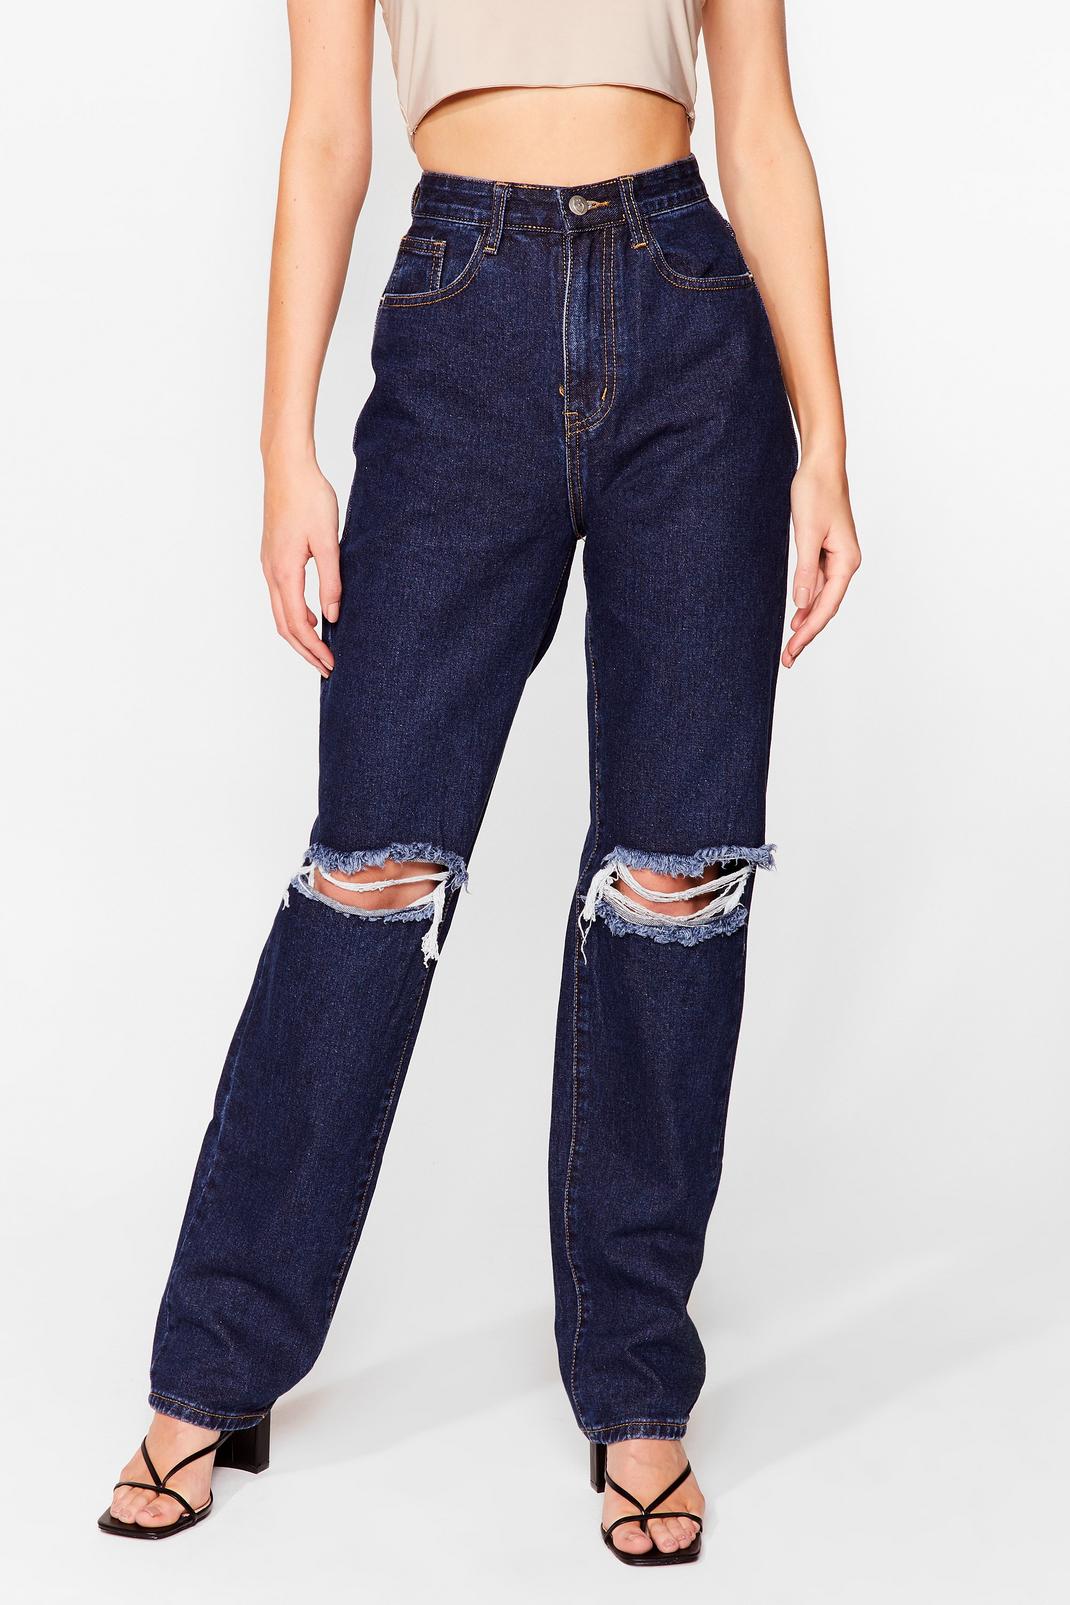 Indigo Don't Distress Me Out Straight Leg Jeans image number 1